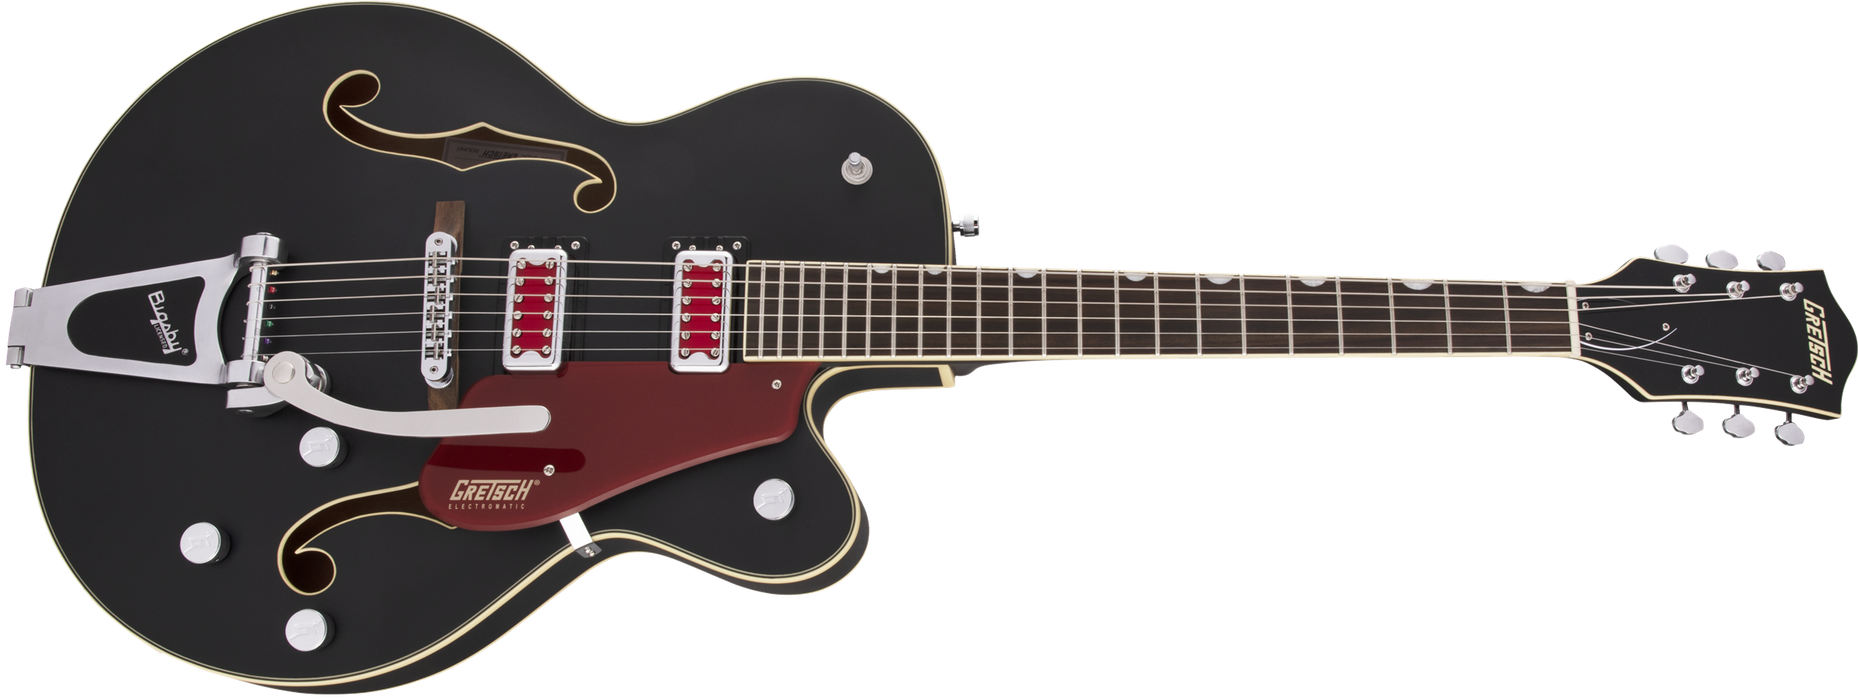 Gretsch G5410T Electromatic® "Rat Rod" Hollow Body Single-Cut with Bigsby®, Rosewood Fingerboard, Matte Black